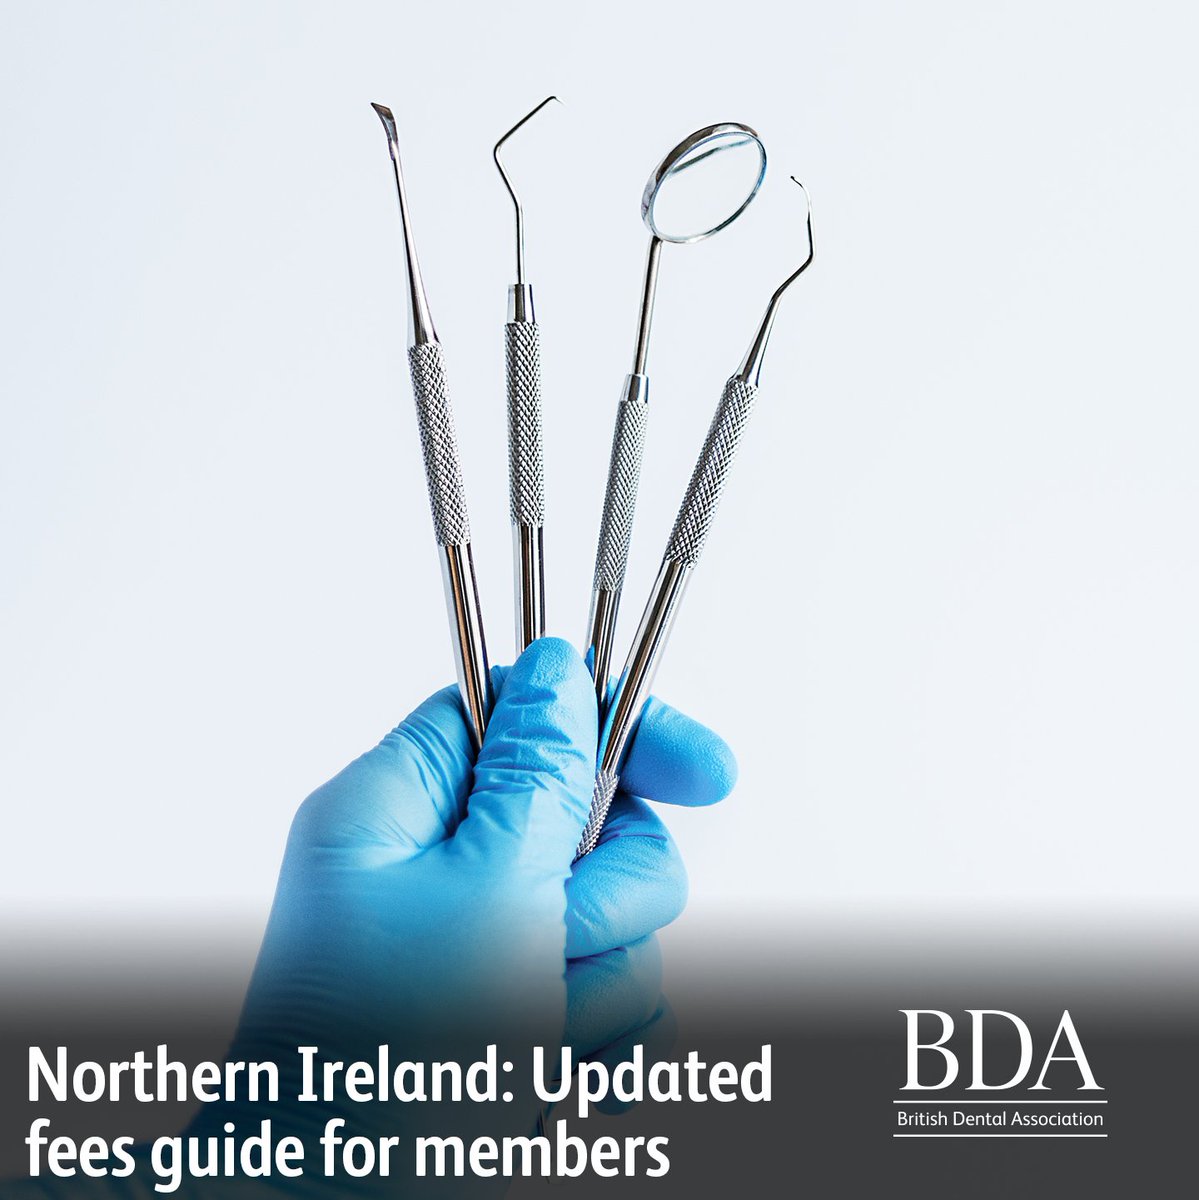 We have created a new fees guide for members in Northern Ireland. Download it here: whttps://www.bda.org/news-and-opinion/news/northern-ireland-updated-fees-guide-for-members/ #BDAinNorthernIreland #BDAinNI